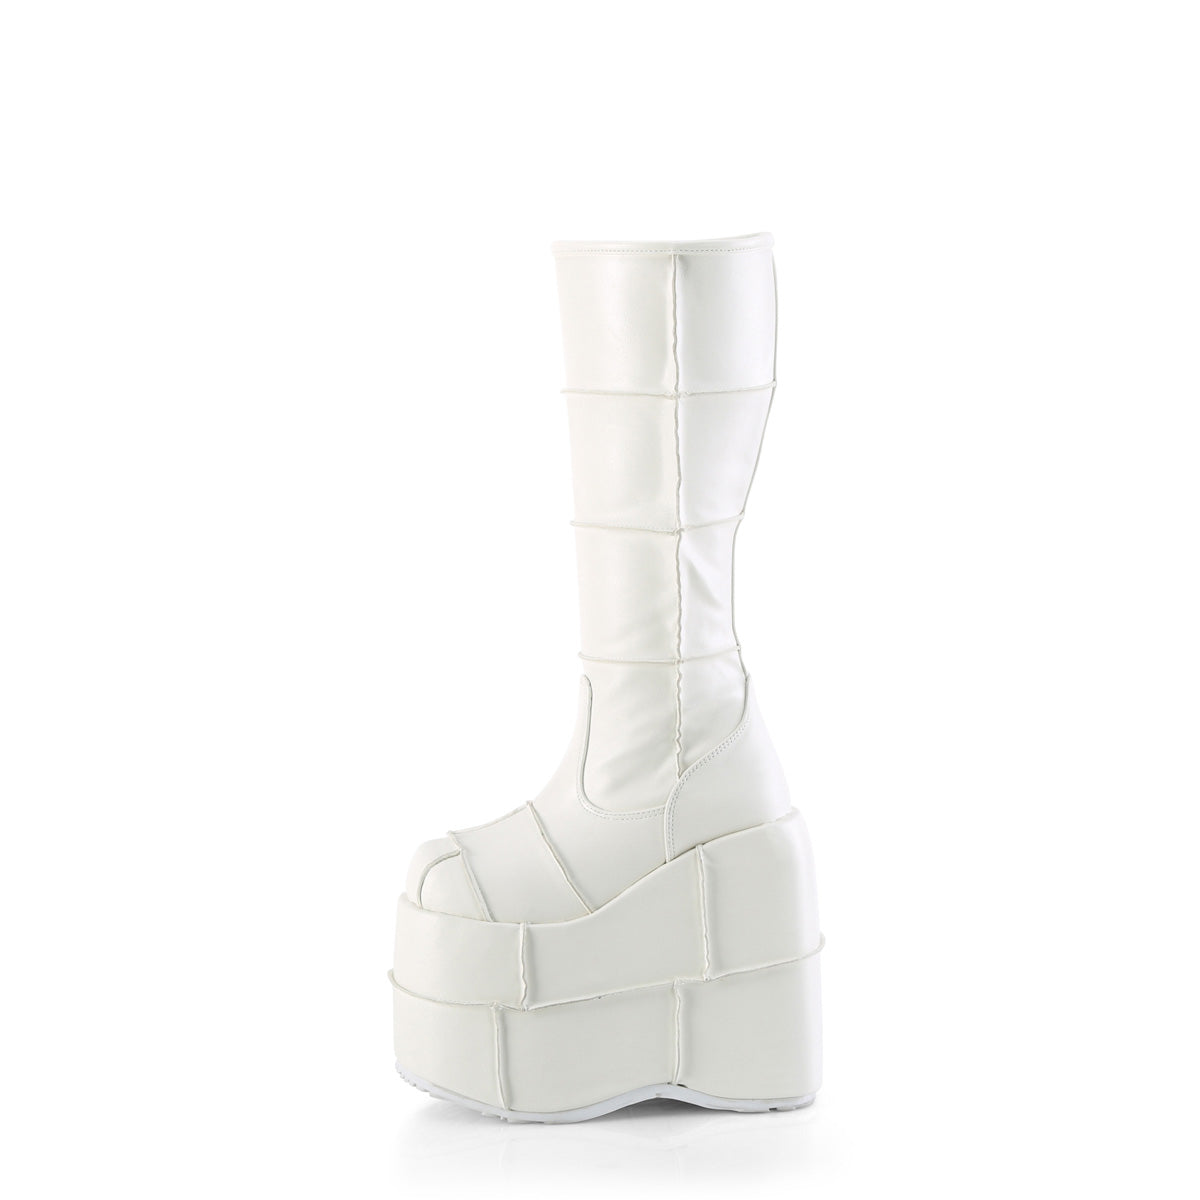 DemoniaCult Mens Boots STACK-301 Wht Vegan Leather